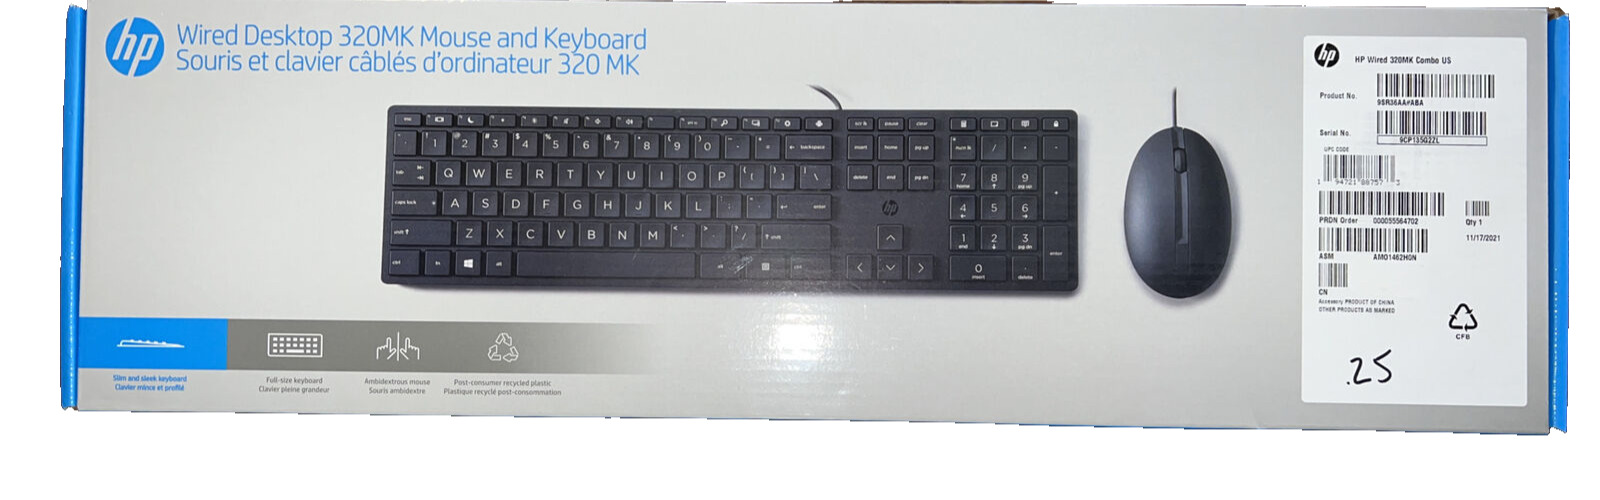 HP Wired Desktop 320MK Mouse and Keyboard,USB 9SR36AA#ABA